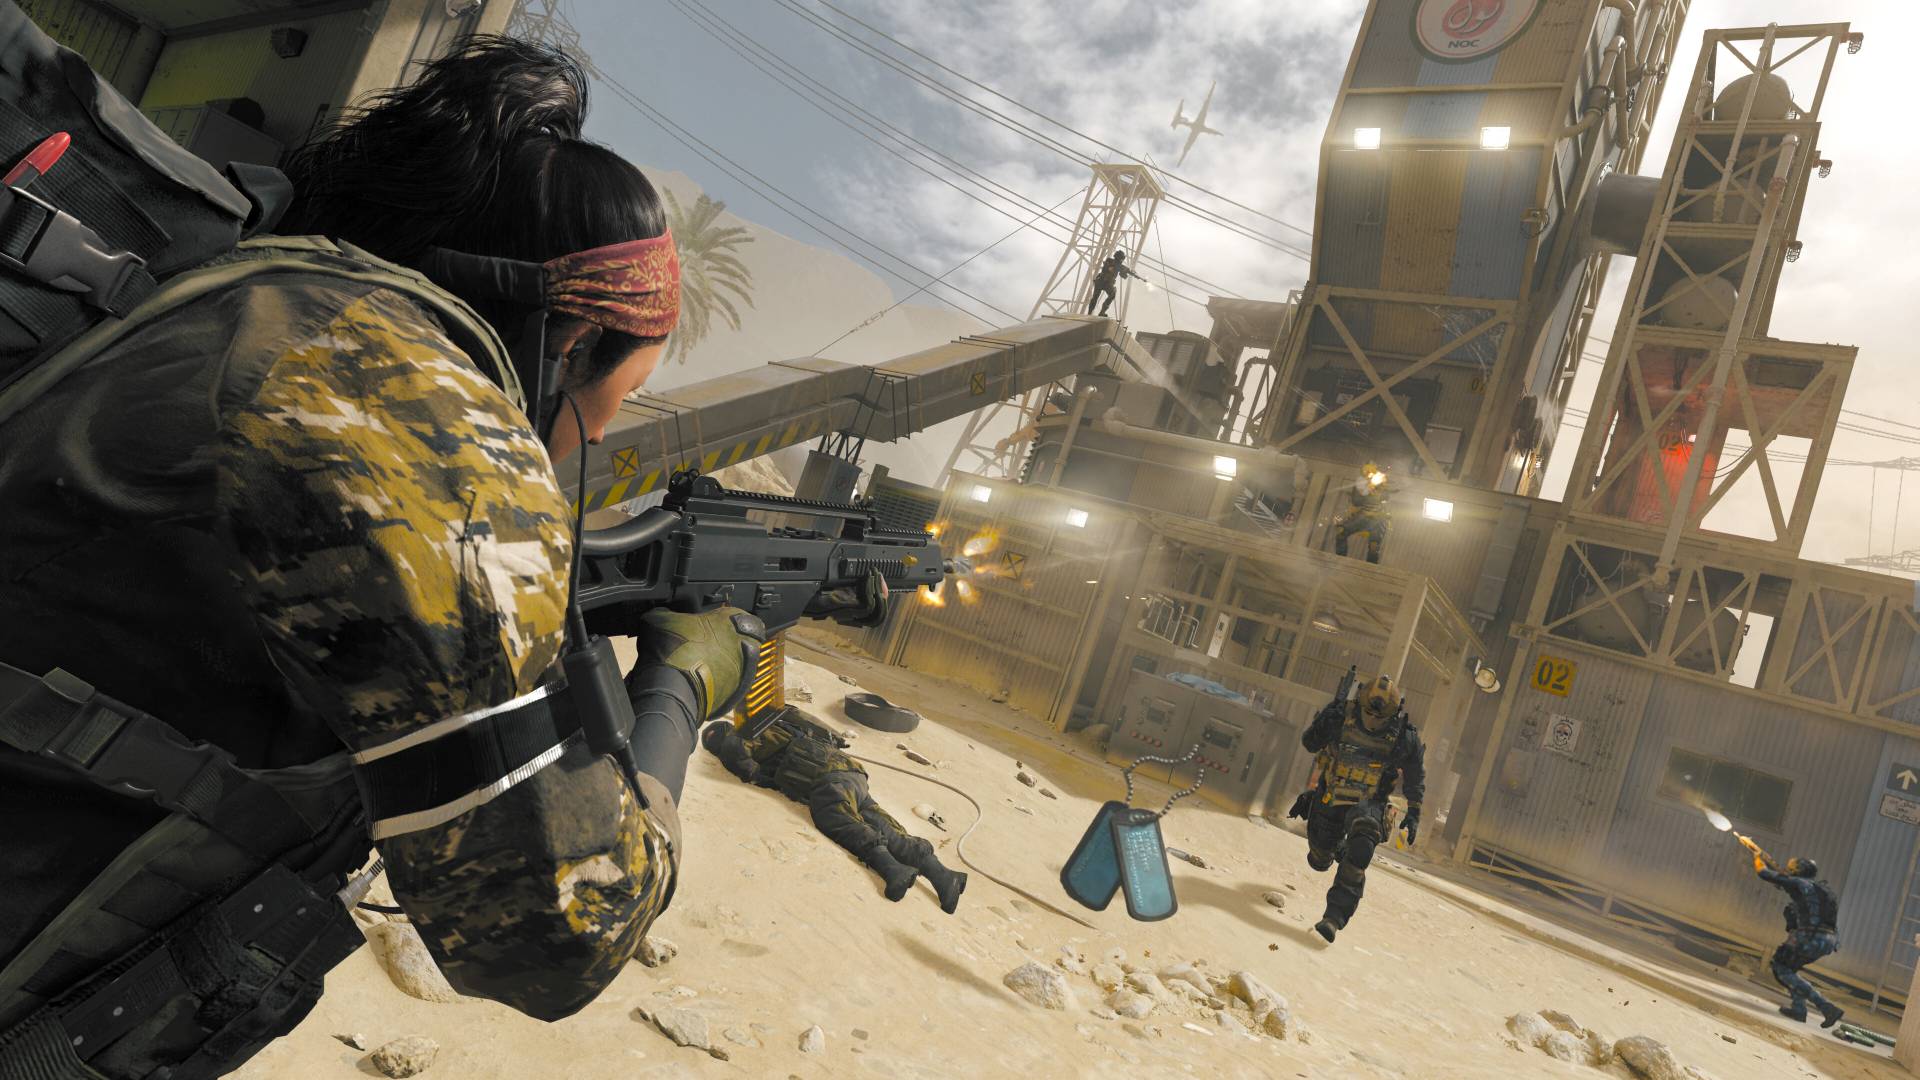 Soldiers fighting over dog tags in Kill Confirmed in Modern Warfare 3